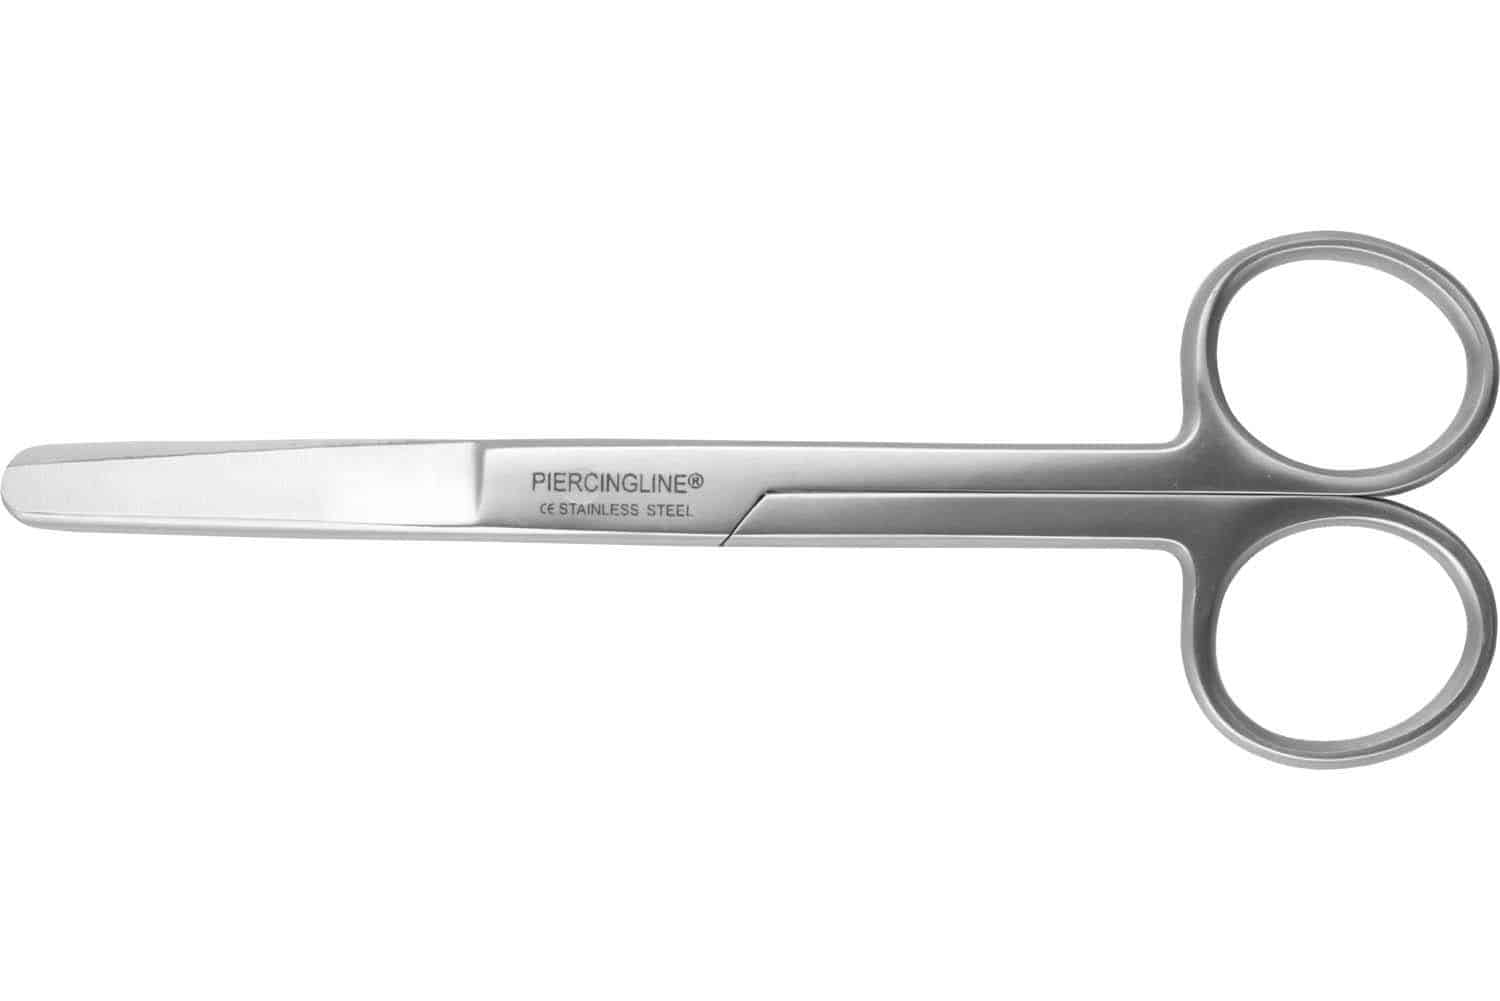 Stainless steel scissors with two flattened sides